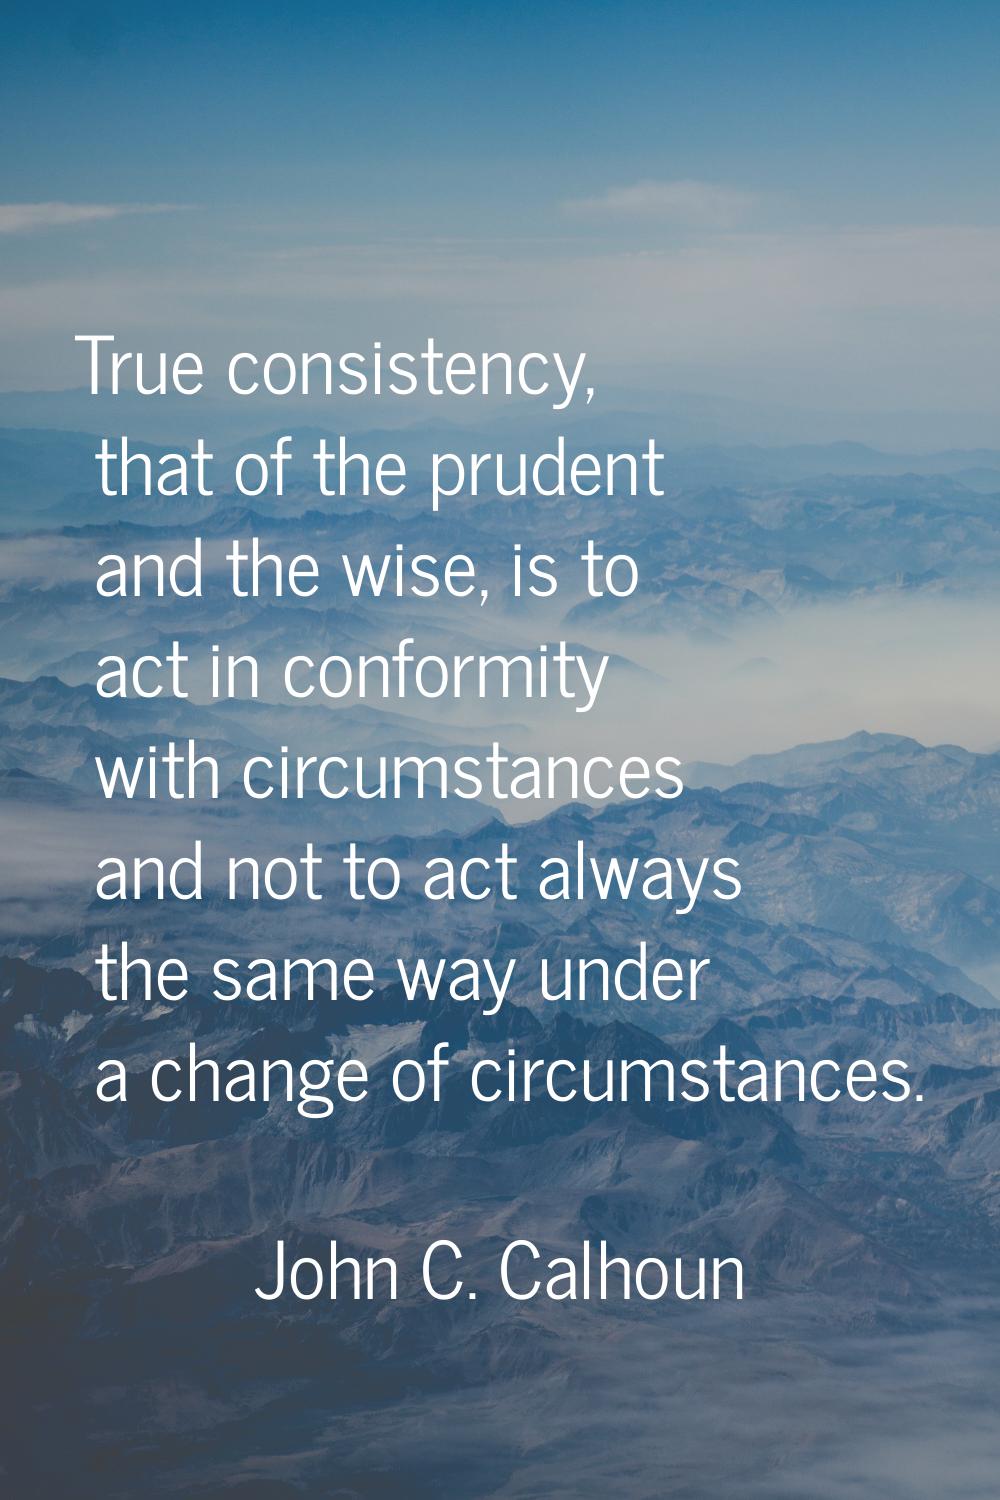 True consistency, that of the prudent and the wise, is to act in conformity with circumstances and 